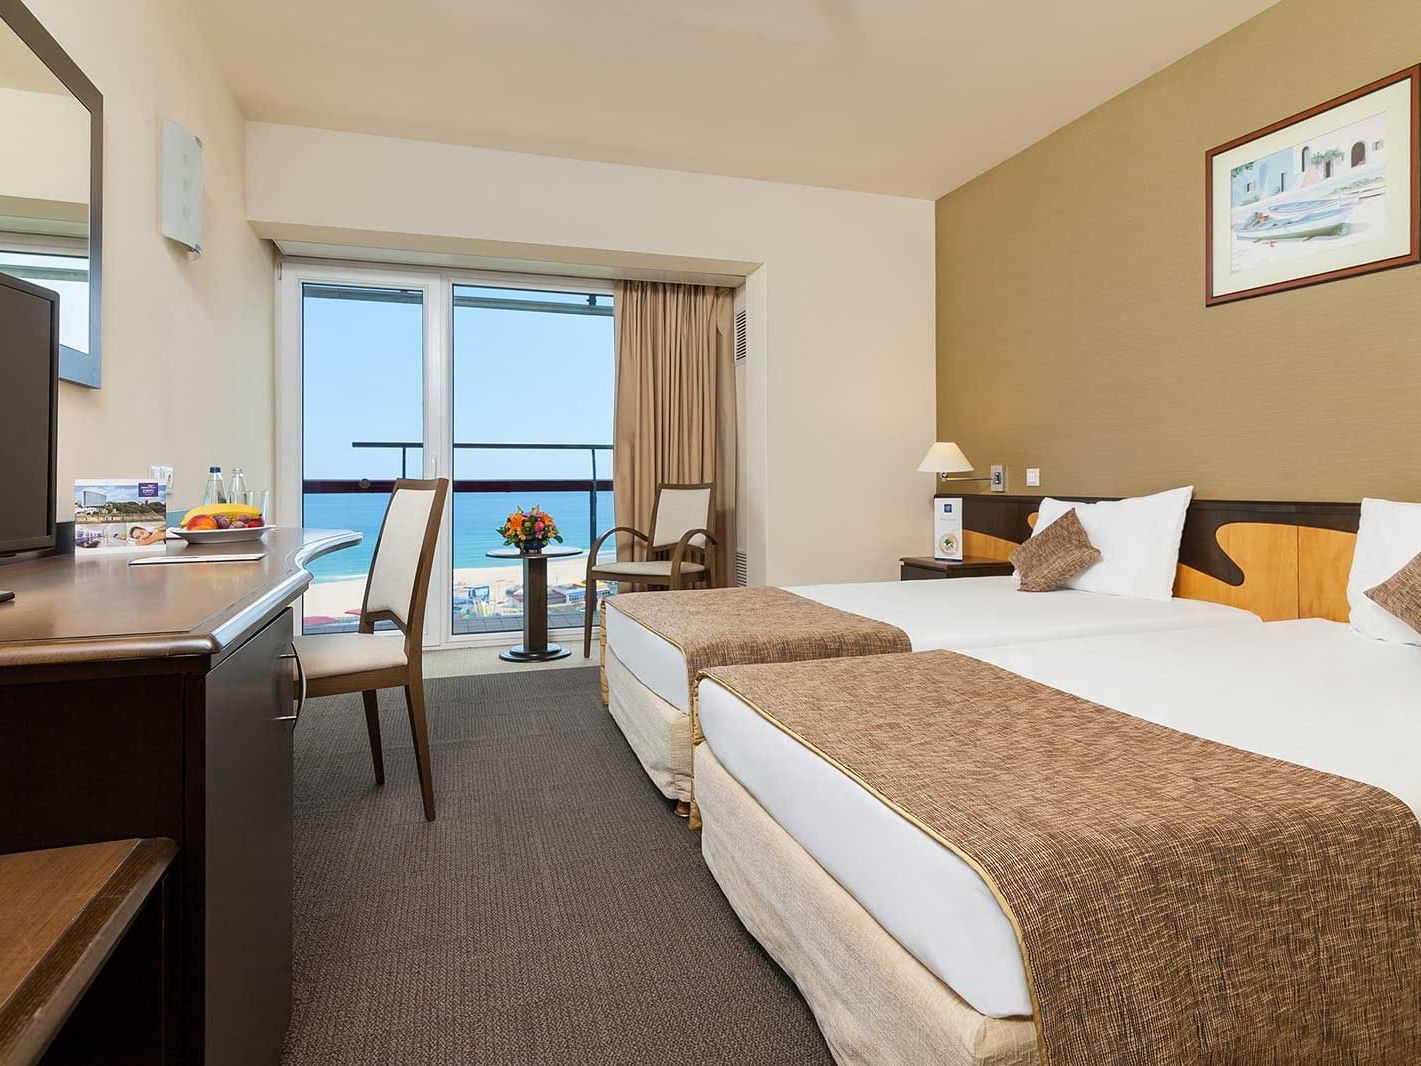 Interior of The Twin Room with beach view at Ana Hotels Europa